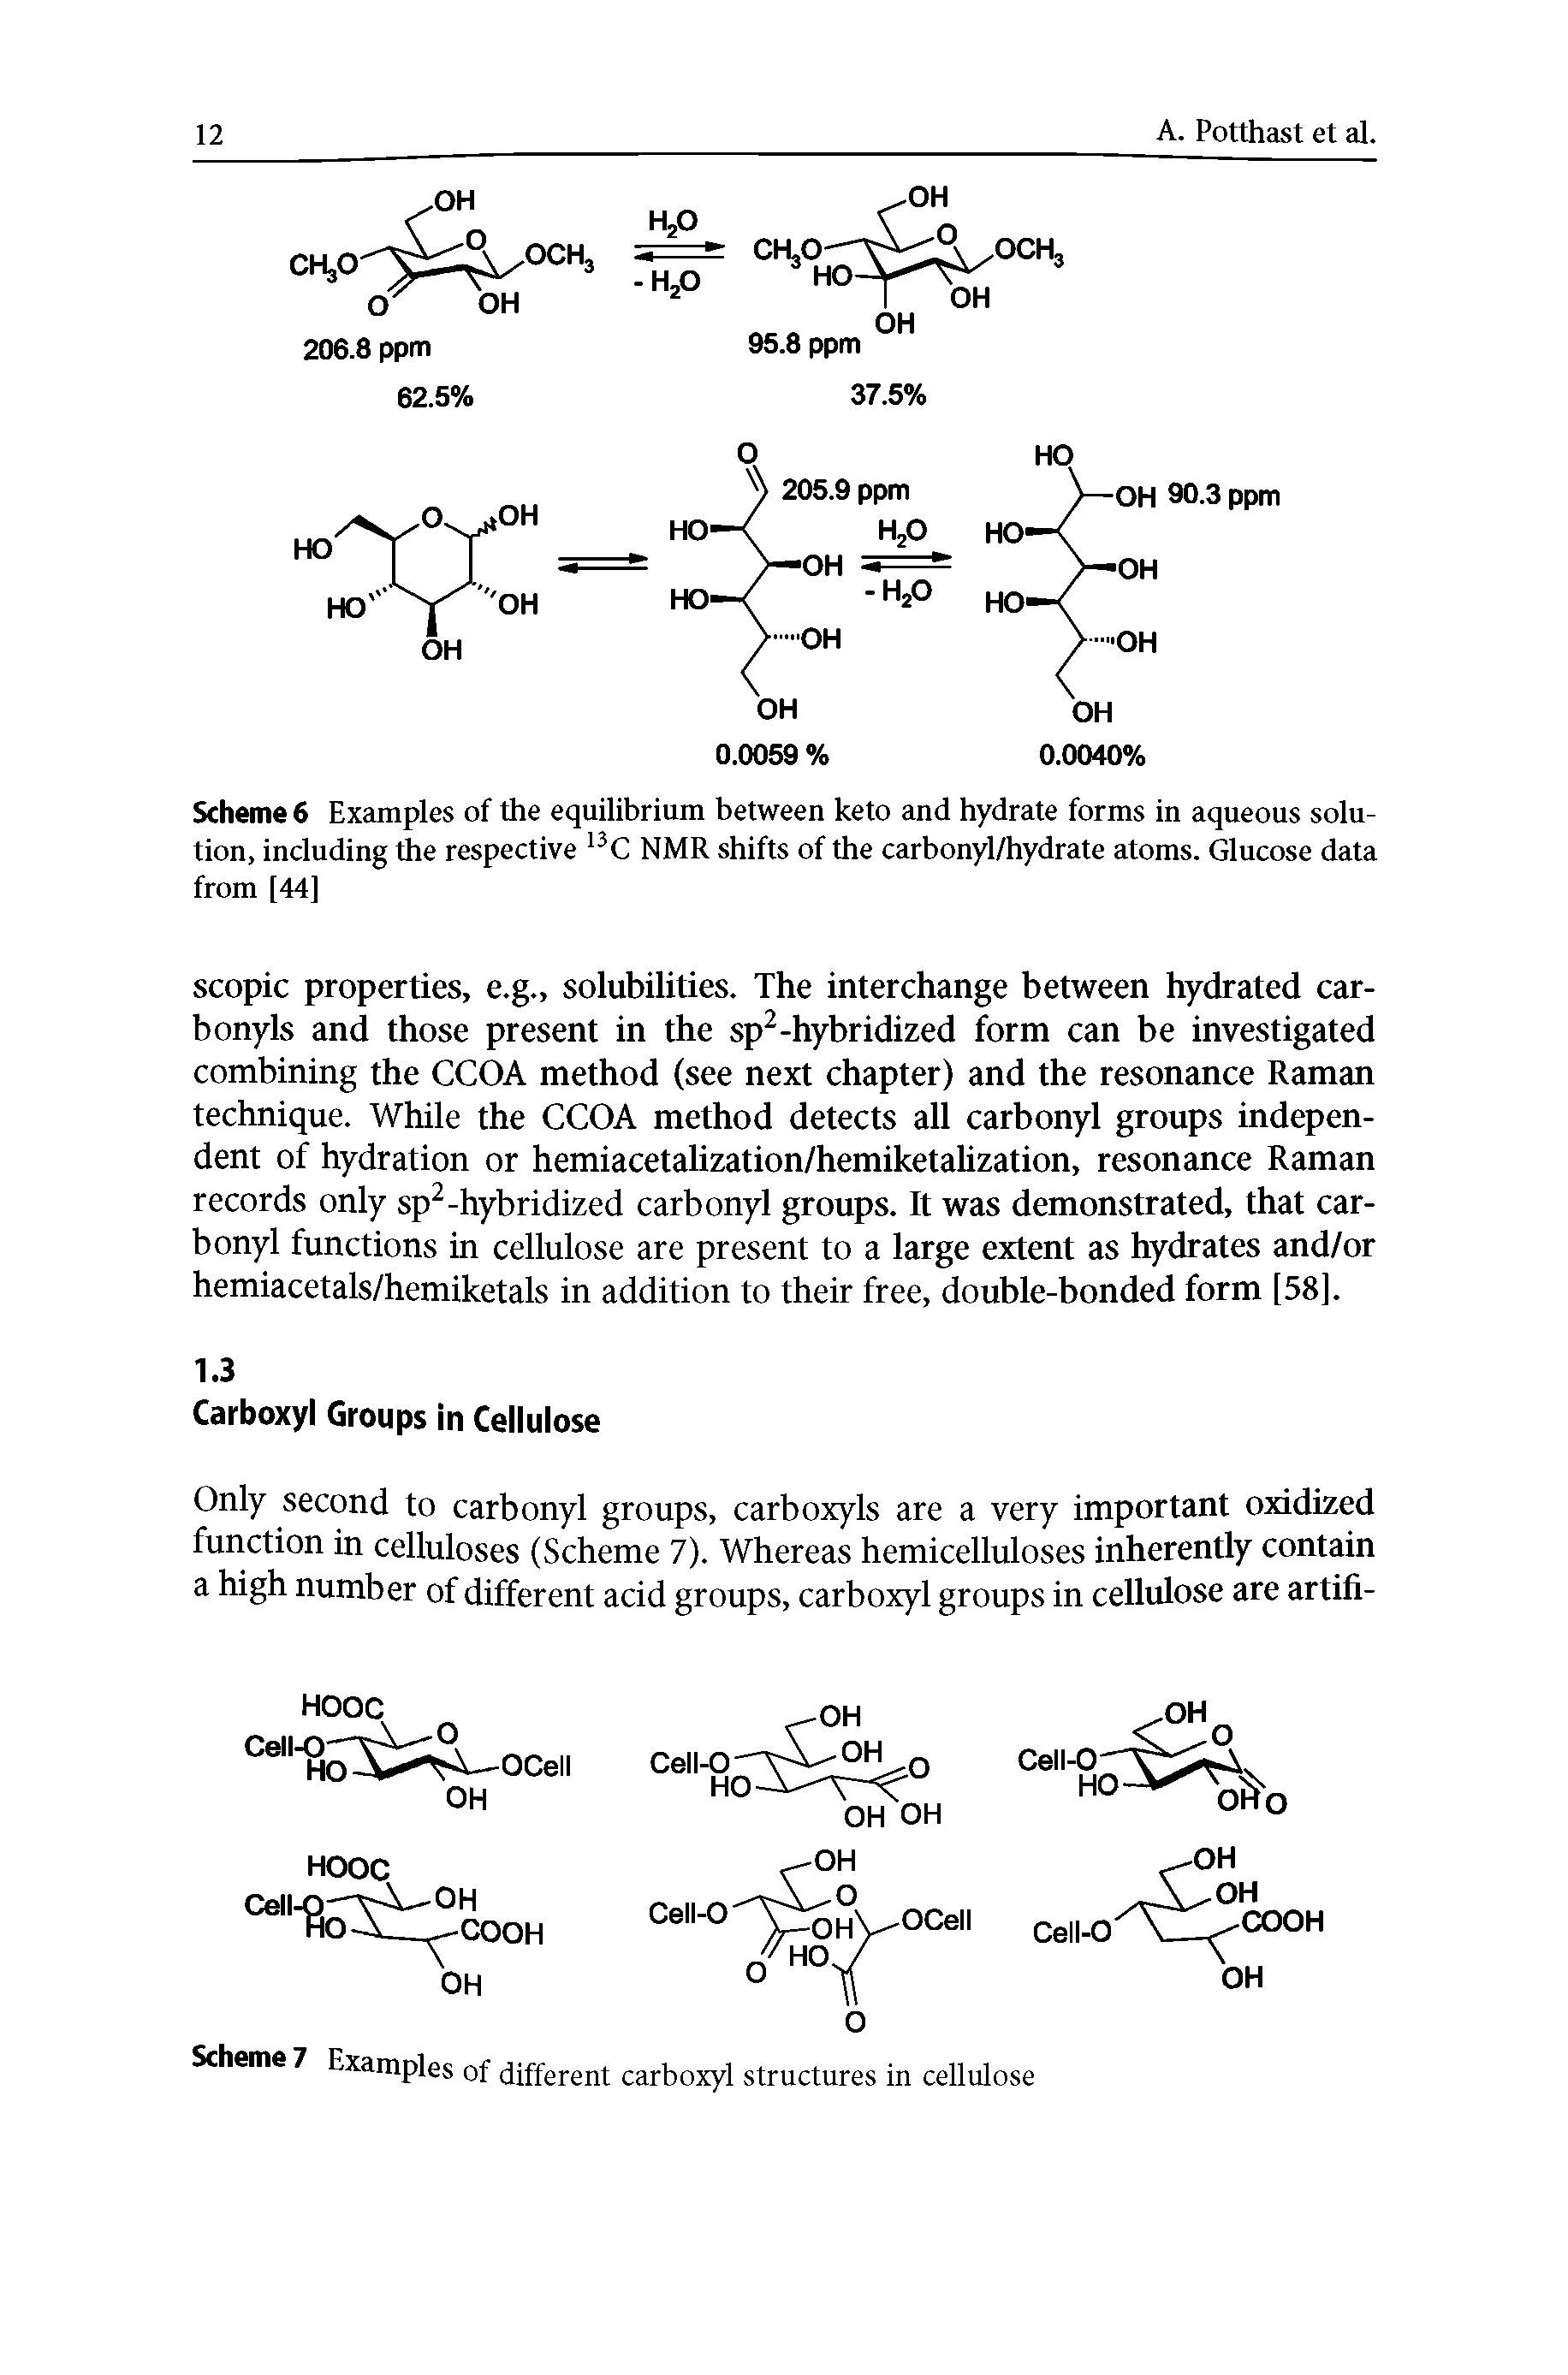 Scheme 7 Examples of different carboxyl structures in cellulose...